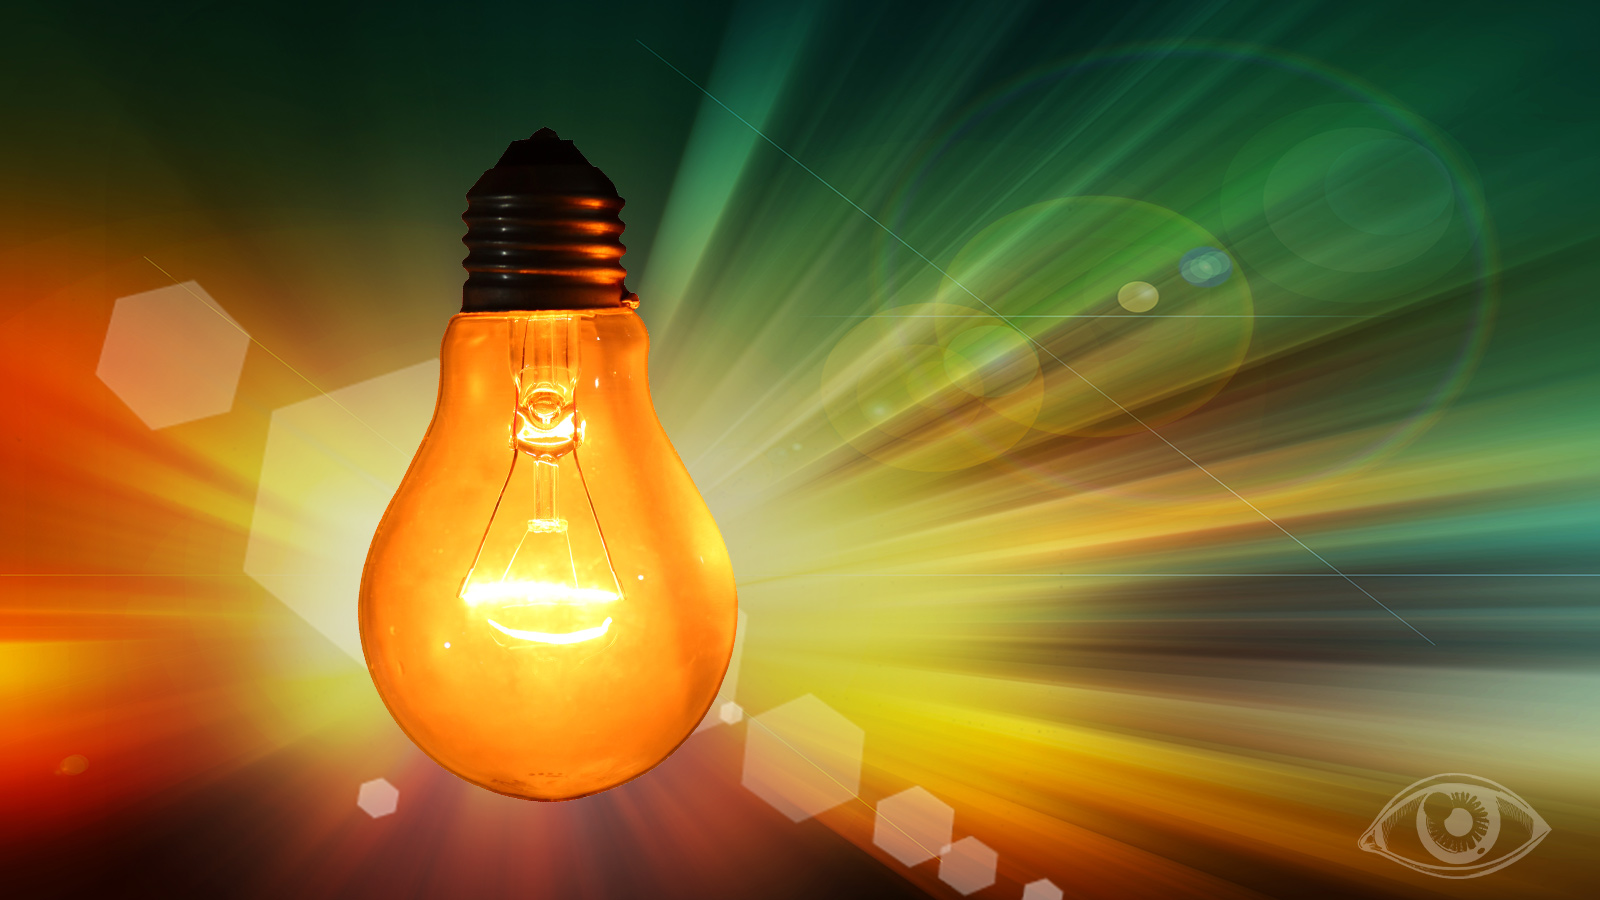 Bright New Ideas on Emergency Lighting - Facilities Management Insights